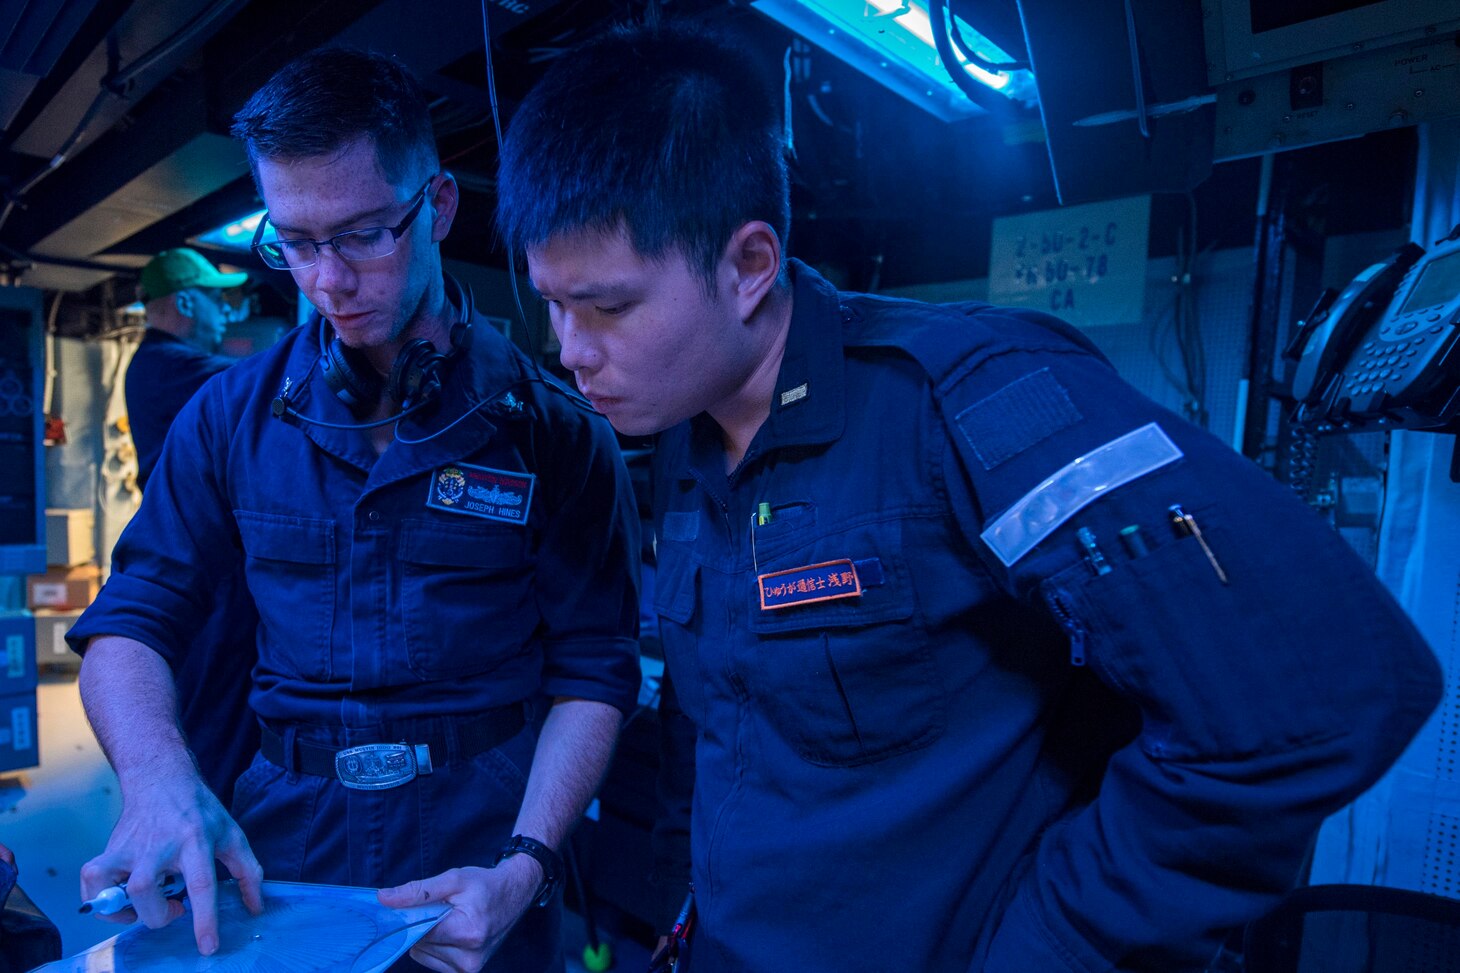 WATERS SOUTH OF JAPAN (Dec. 4, 2018) Sonar Technician (Surface) 2nd Class Joseph Hines, from Denver, explains how to use a range finder to Japan Maritime Self-Defense Force (JMSDF) Ensign Asano Shinchi, assigned to the JMSDF destroyer JS Hyuga (DDH-181), in the sonar control room aboard the Arleigh Burke-class guided-missile destroyer USS Benfold (DDG 65). Benfold is forward-deployed to the U.S. 7th Fleet area of operations in support of security and stability in the Indo-Pacific region.